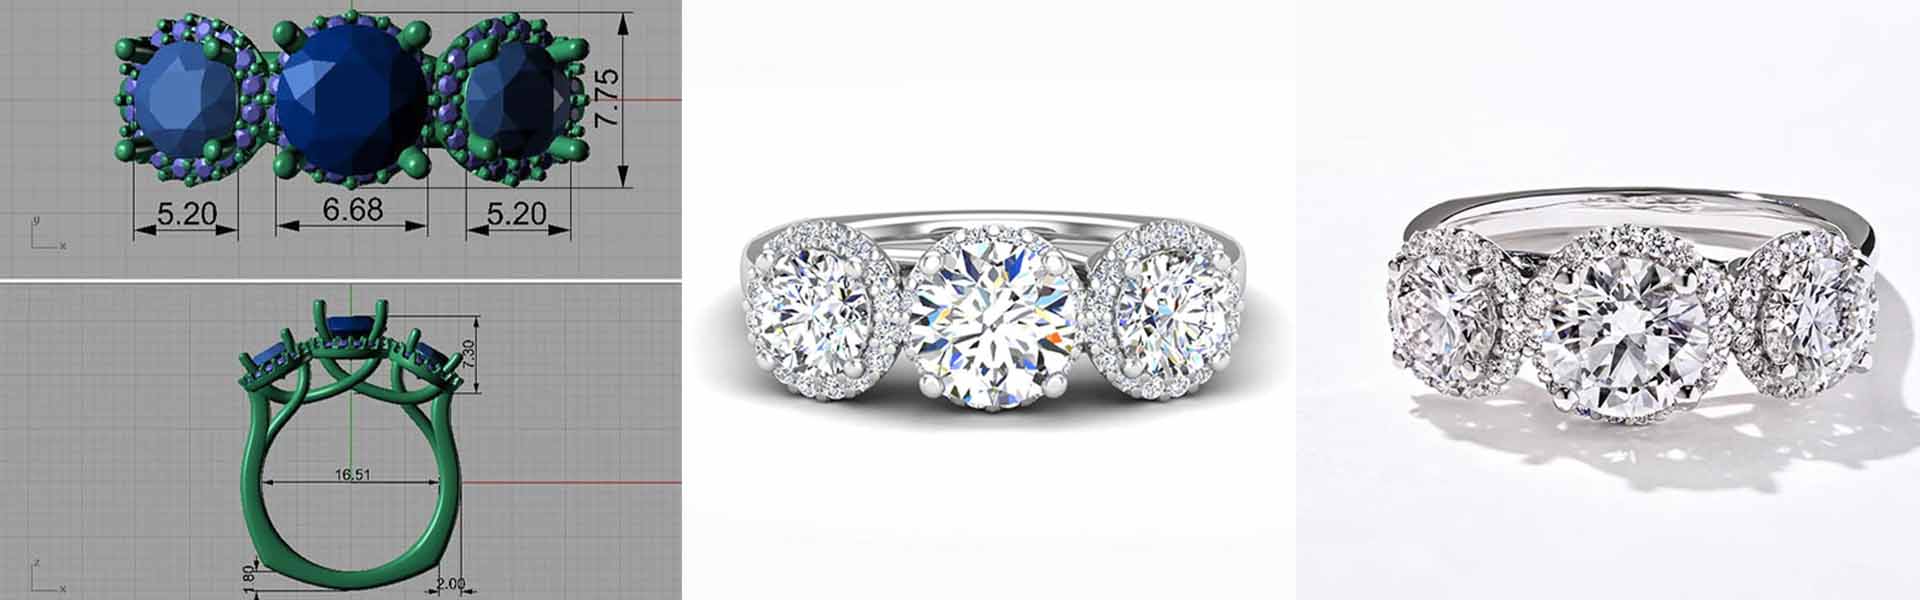 custom designed ring rendered concept of large center stone with a halo of diamonds and filigree